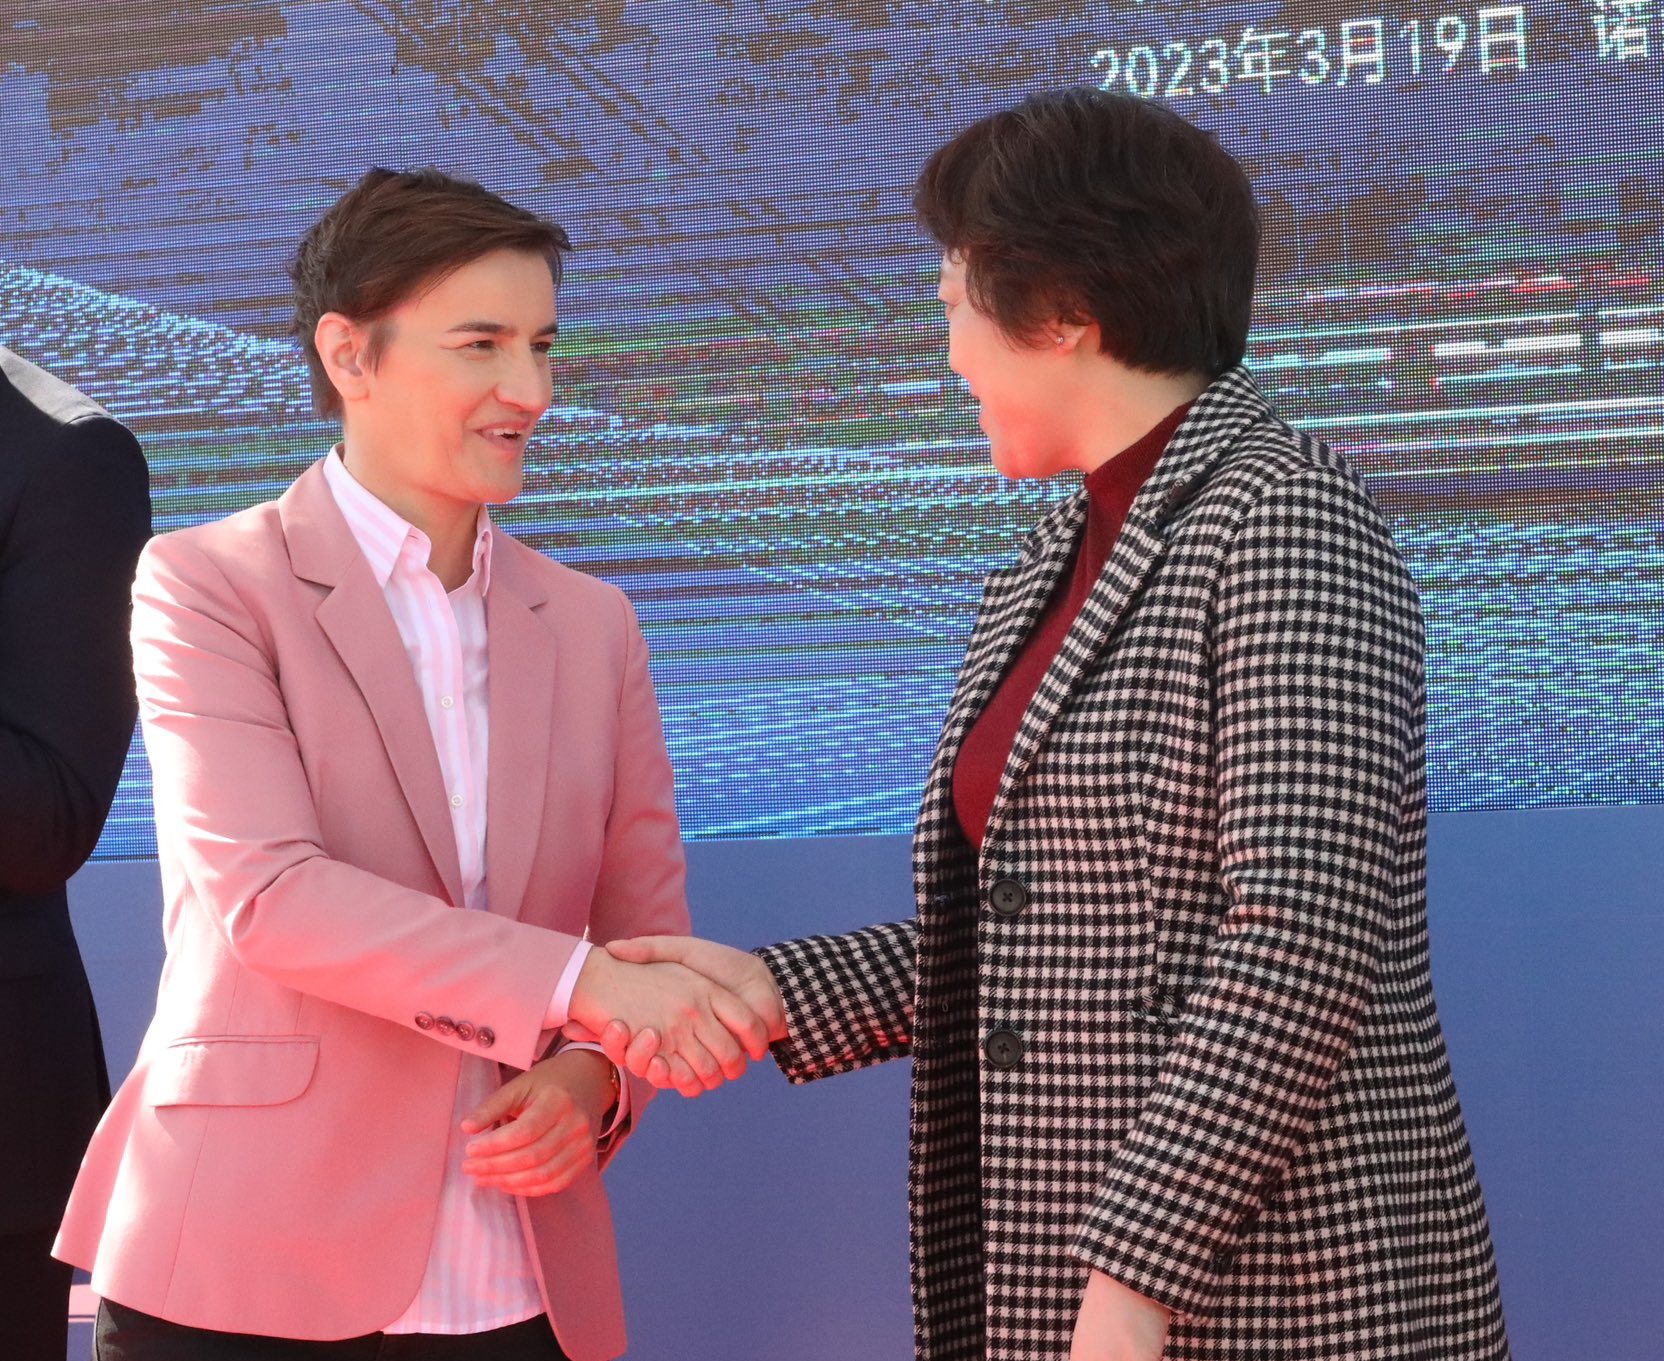 Serbian PM Ana Brnabic and Chinese Ambassador for Serbia Chen Bo shake hands at the anniversary ceremony